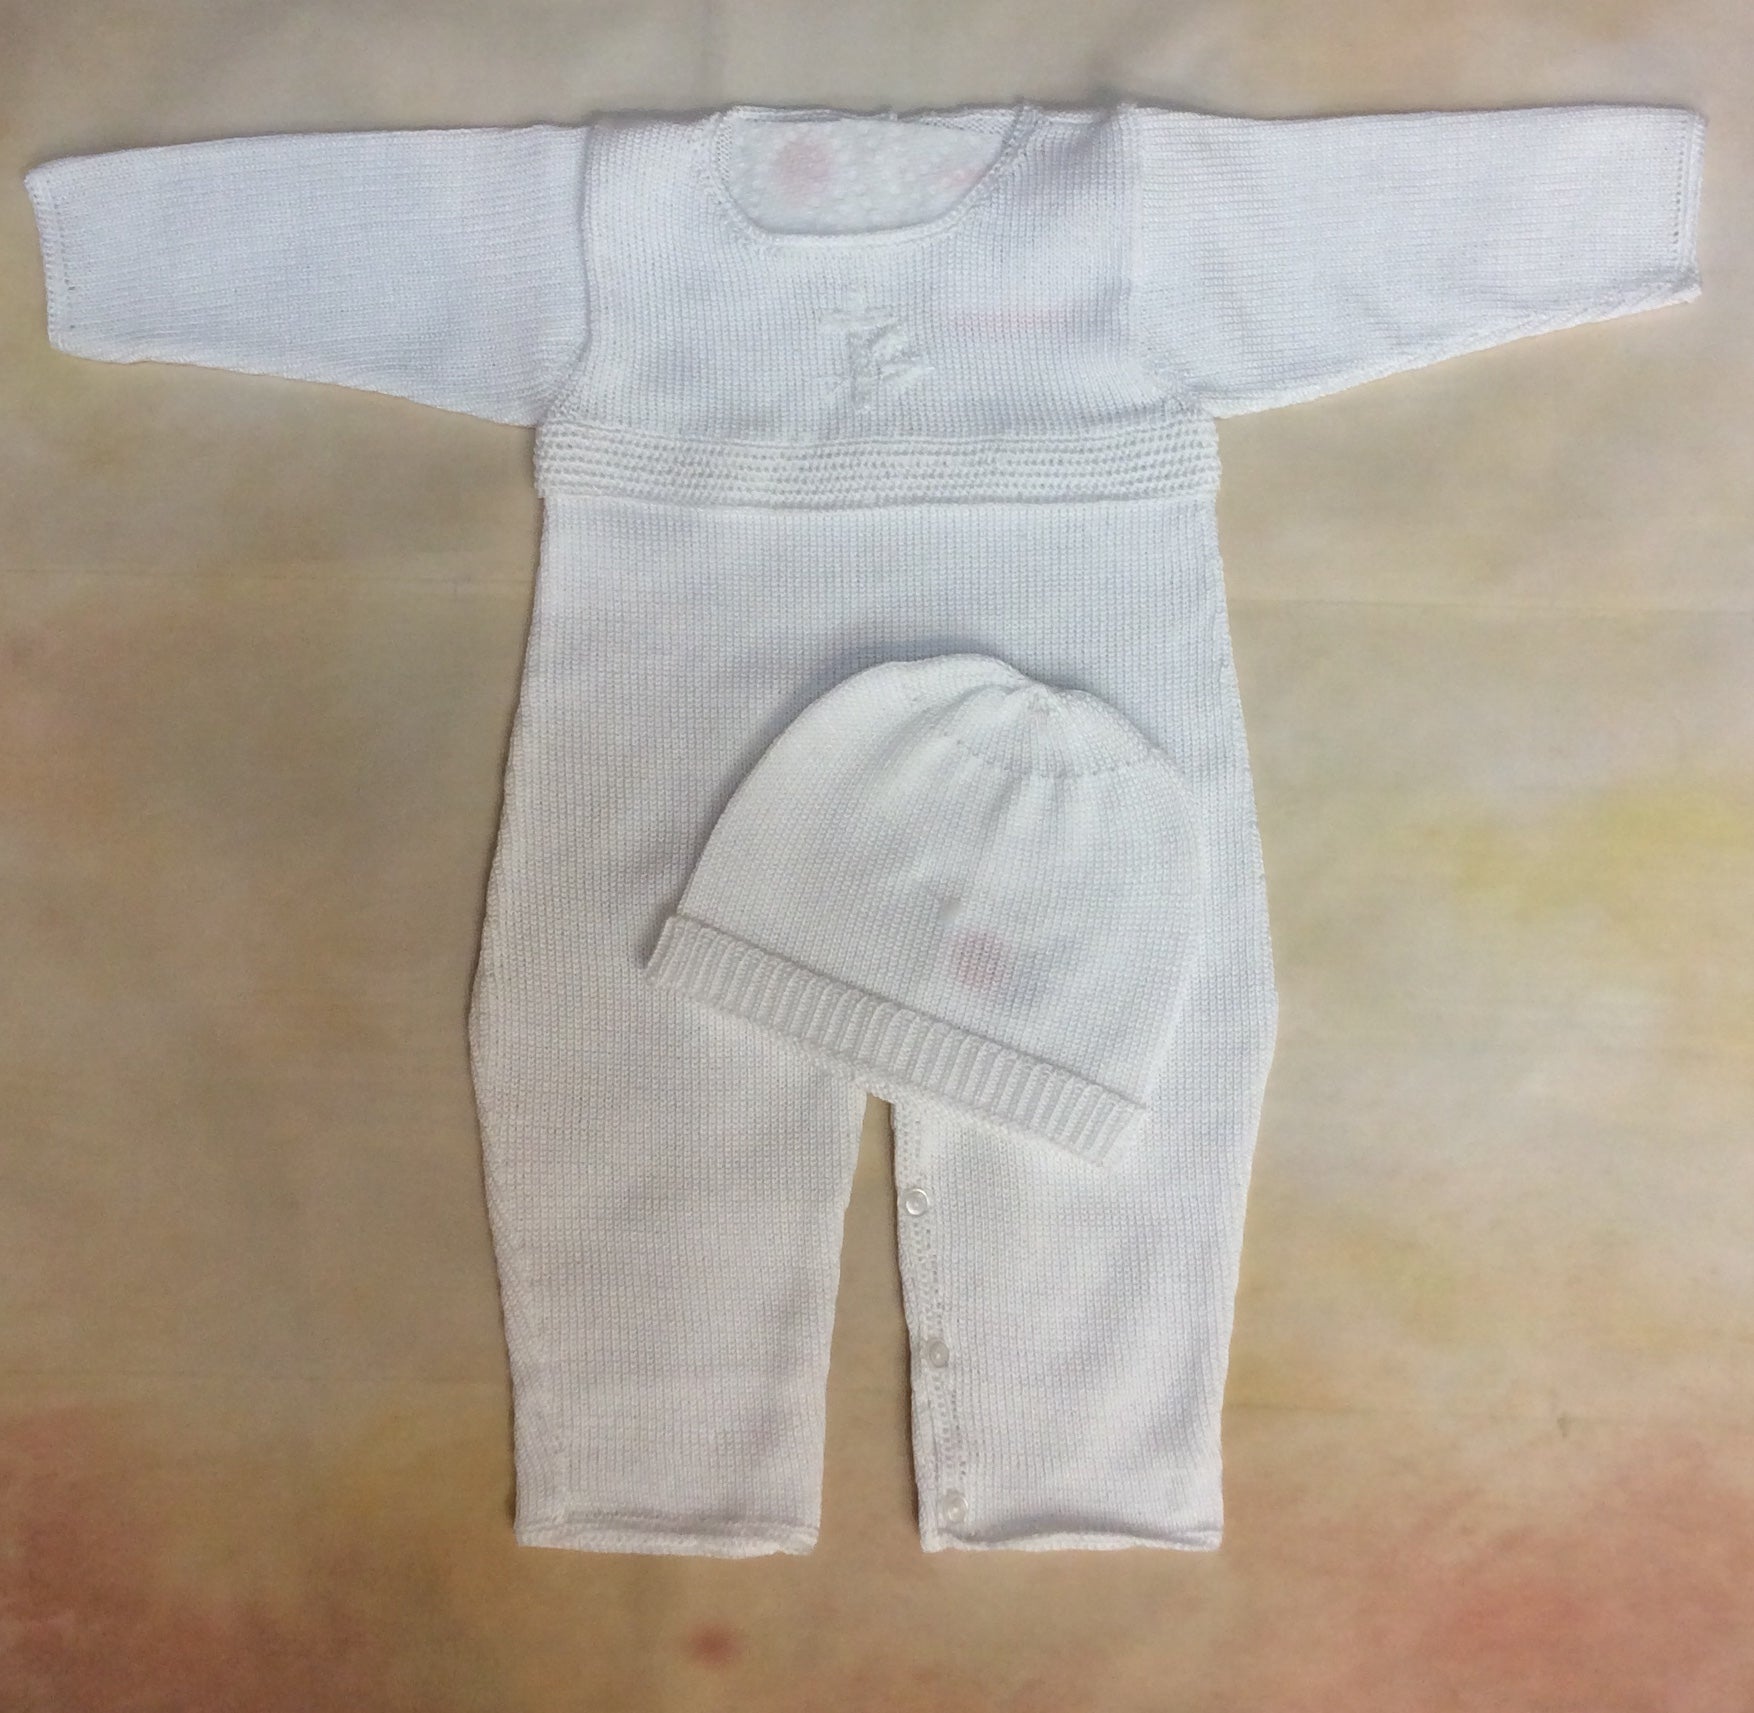 T2EG-001 Boys White with Christening / Dedication Cross Knit-Nenes Lullaby Boutique Inc-Nenes Lullaby Boutique Inc